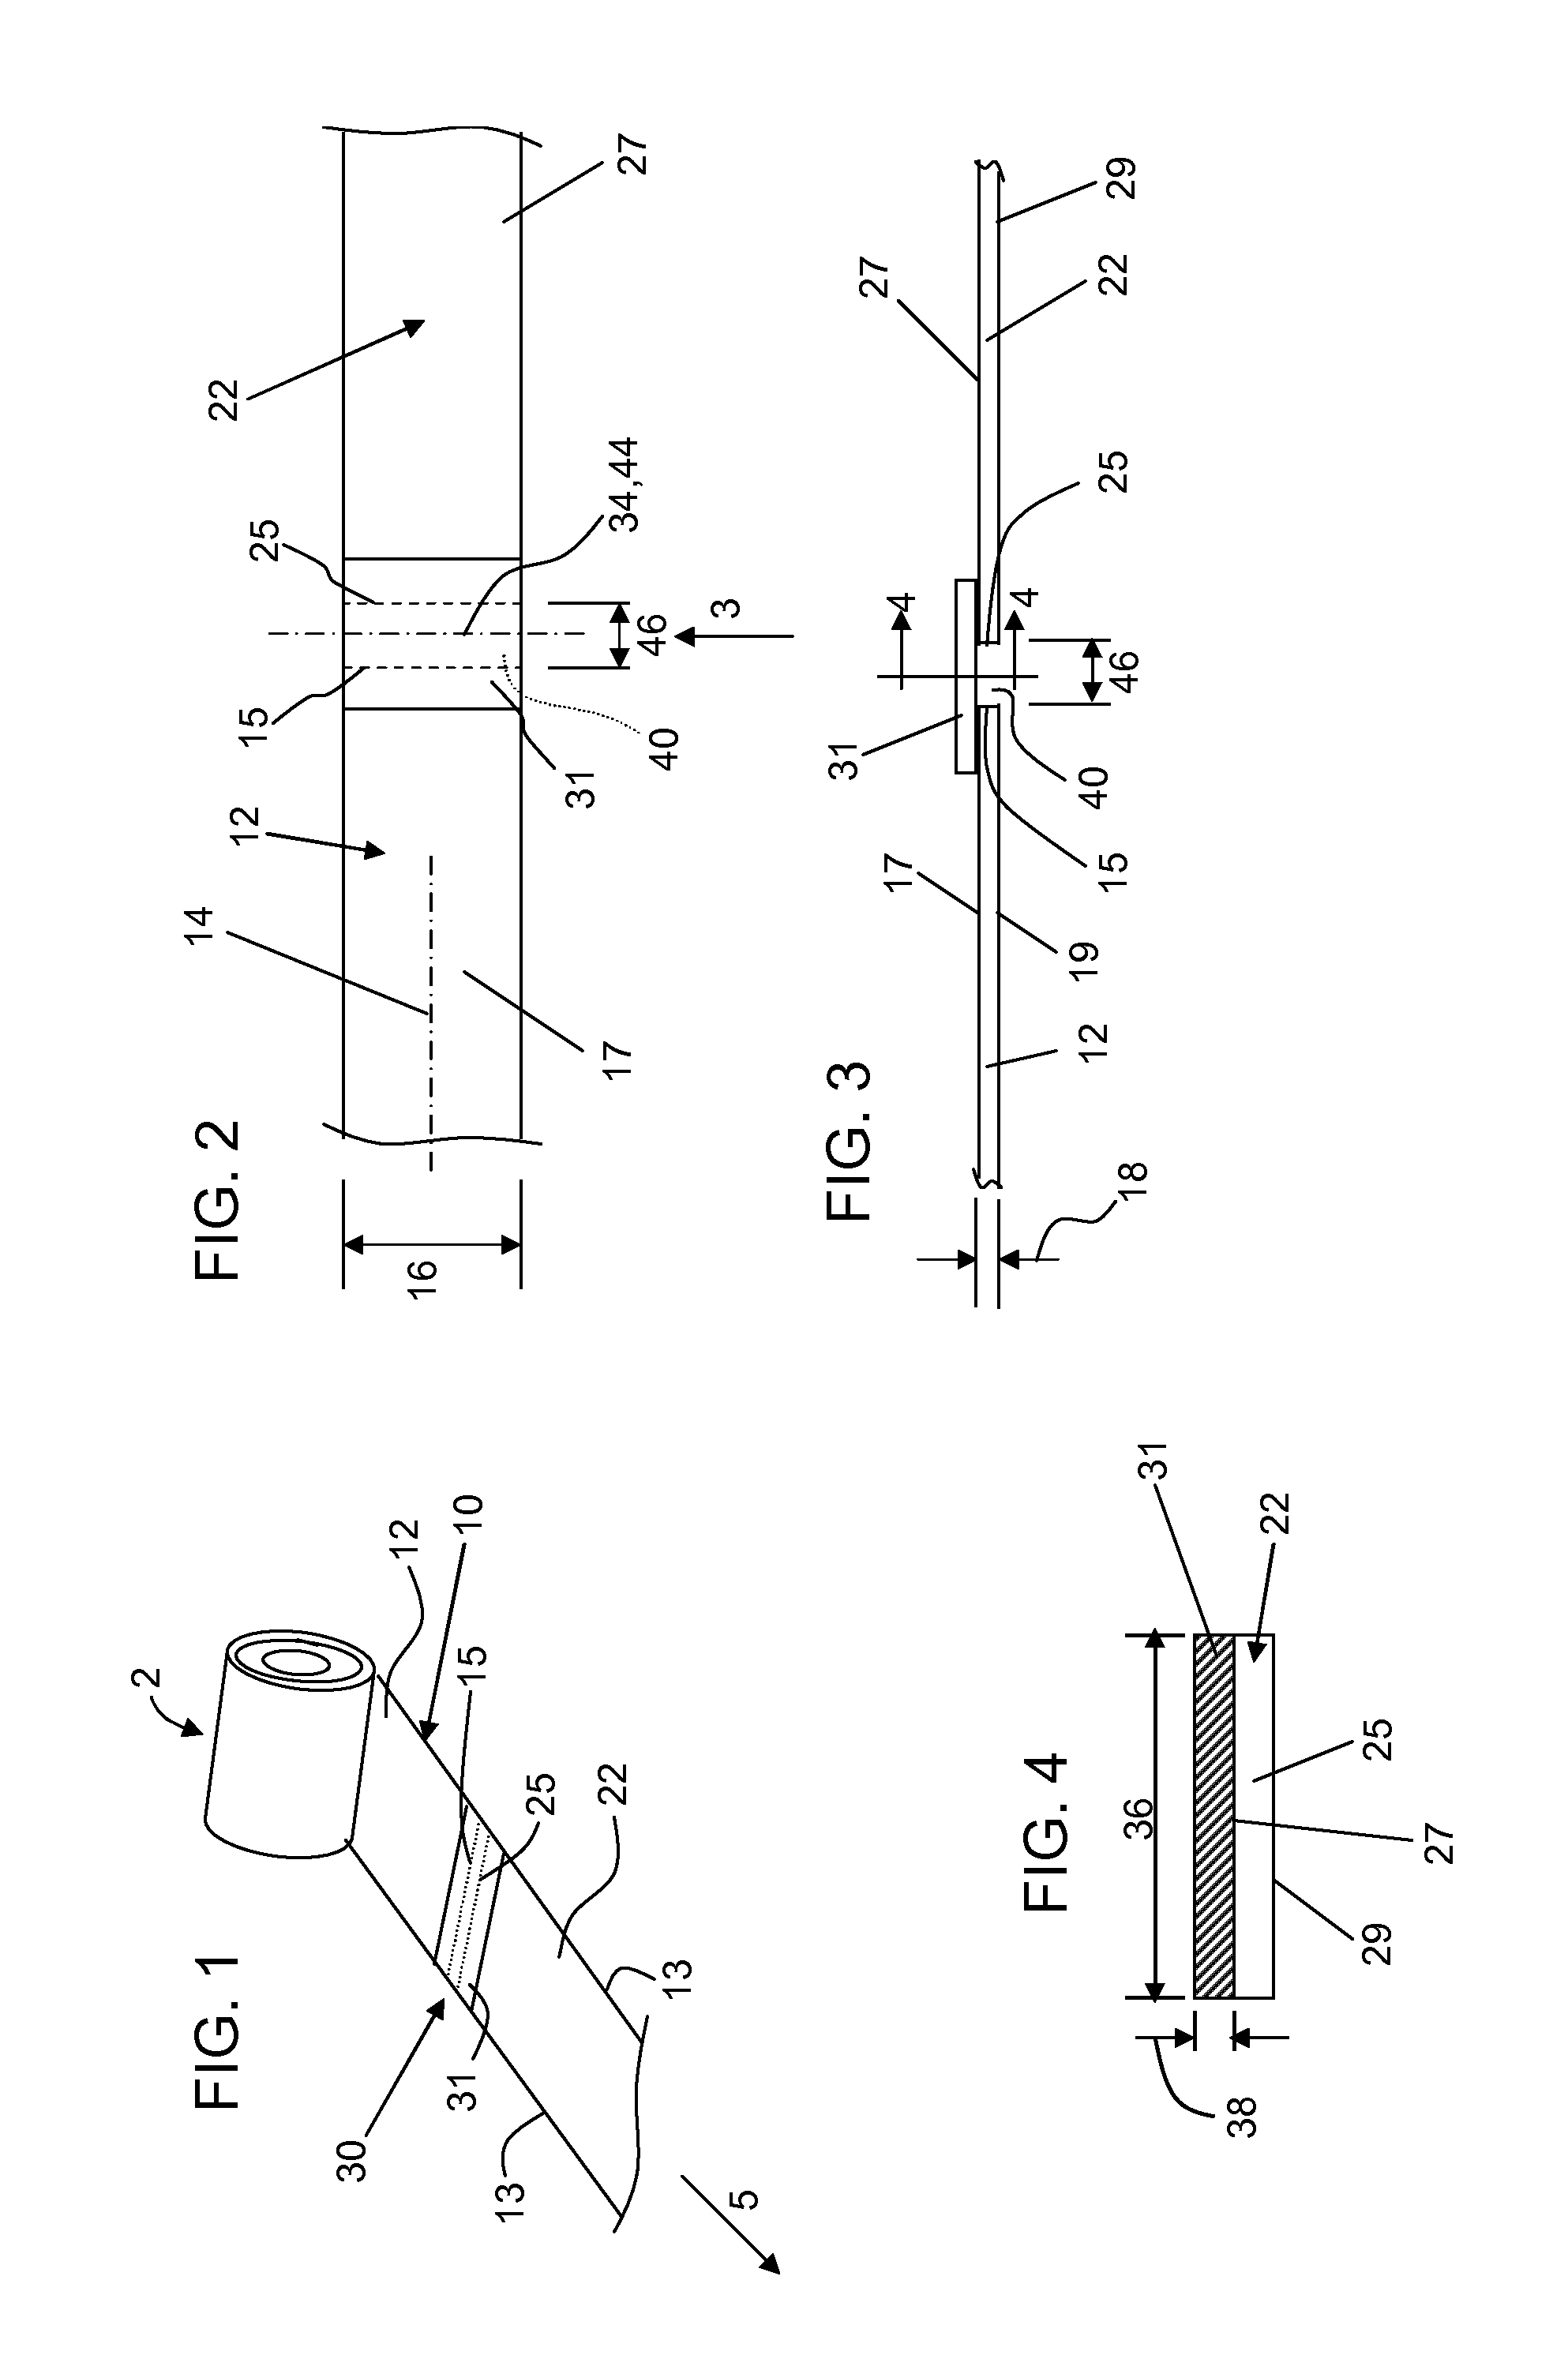 Structures and methods for splicing glass ribbon